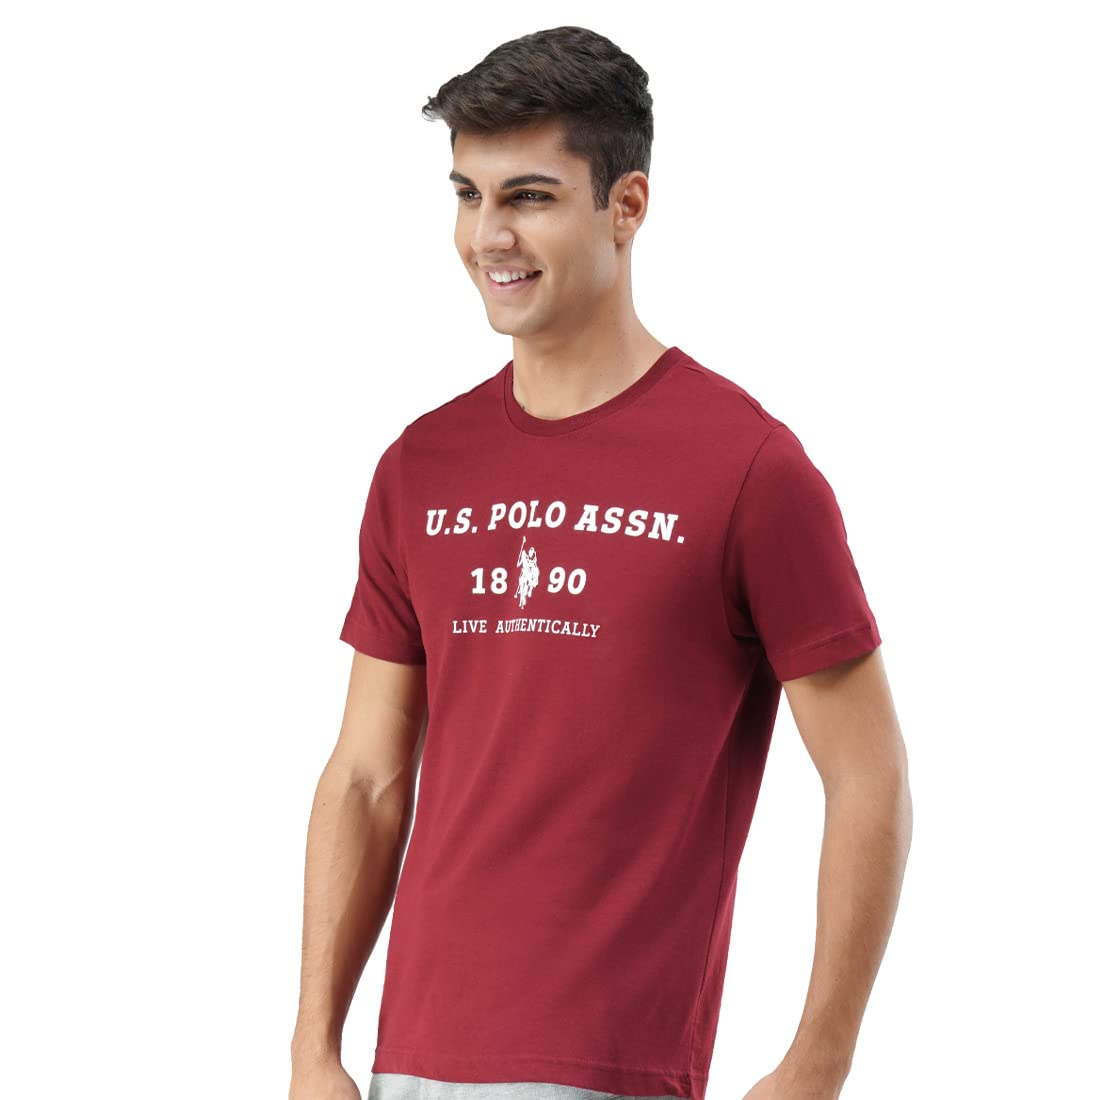 U.S. Polo Assn. Men Comfort Fit Brand Print I683 T-Shirt - Pack Of 1 (RED L)